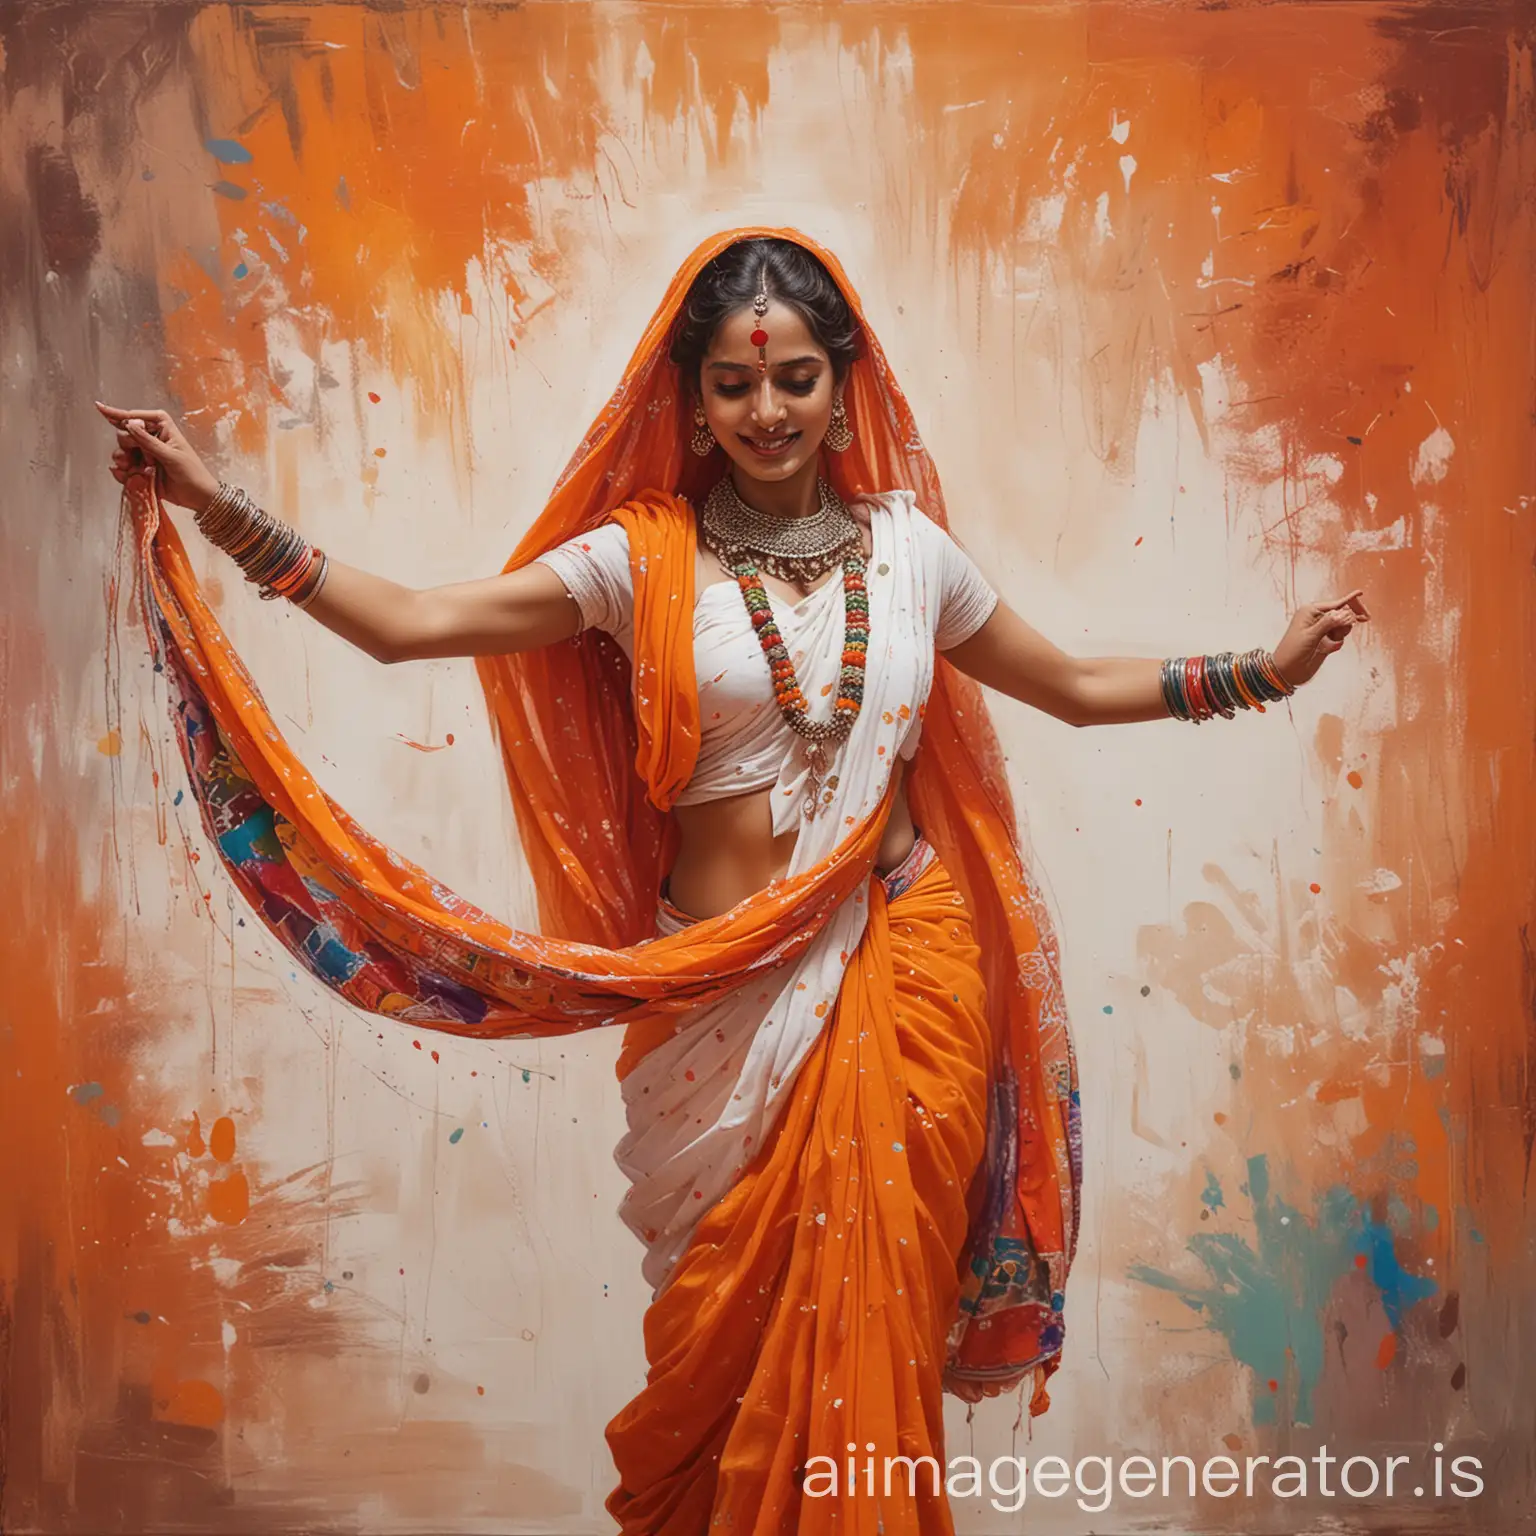 Long-view Abstract painting of a covered-faced-Rajasthani woman dressed traditionally & wearing-white-bangles, orange sari happily dancing with colourful paint-strokes on background.